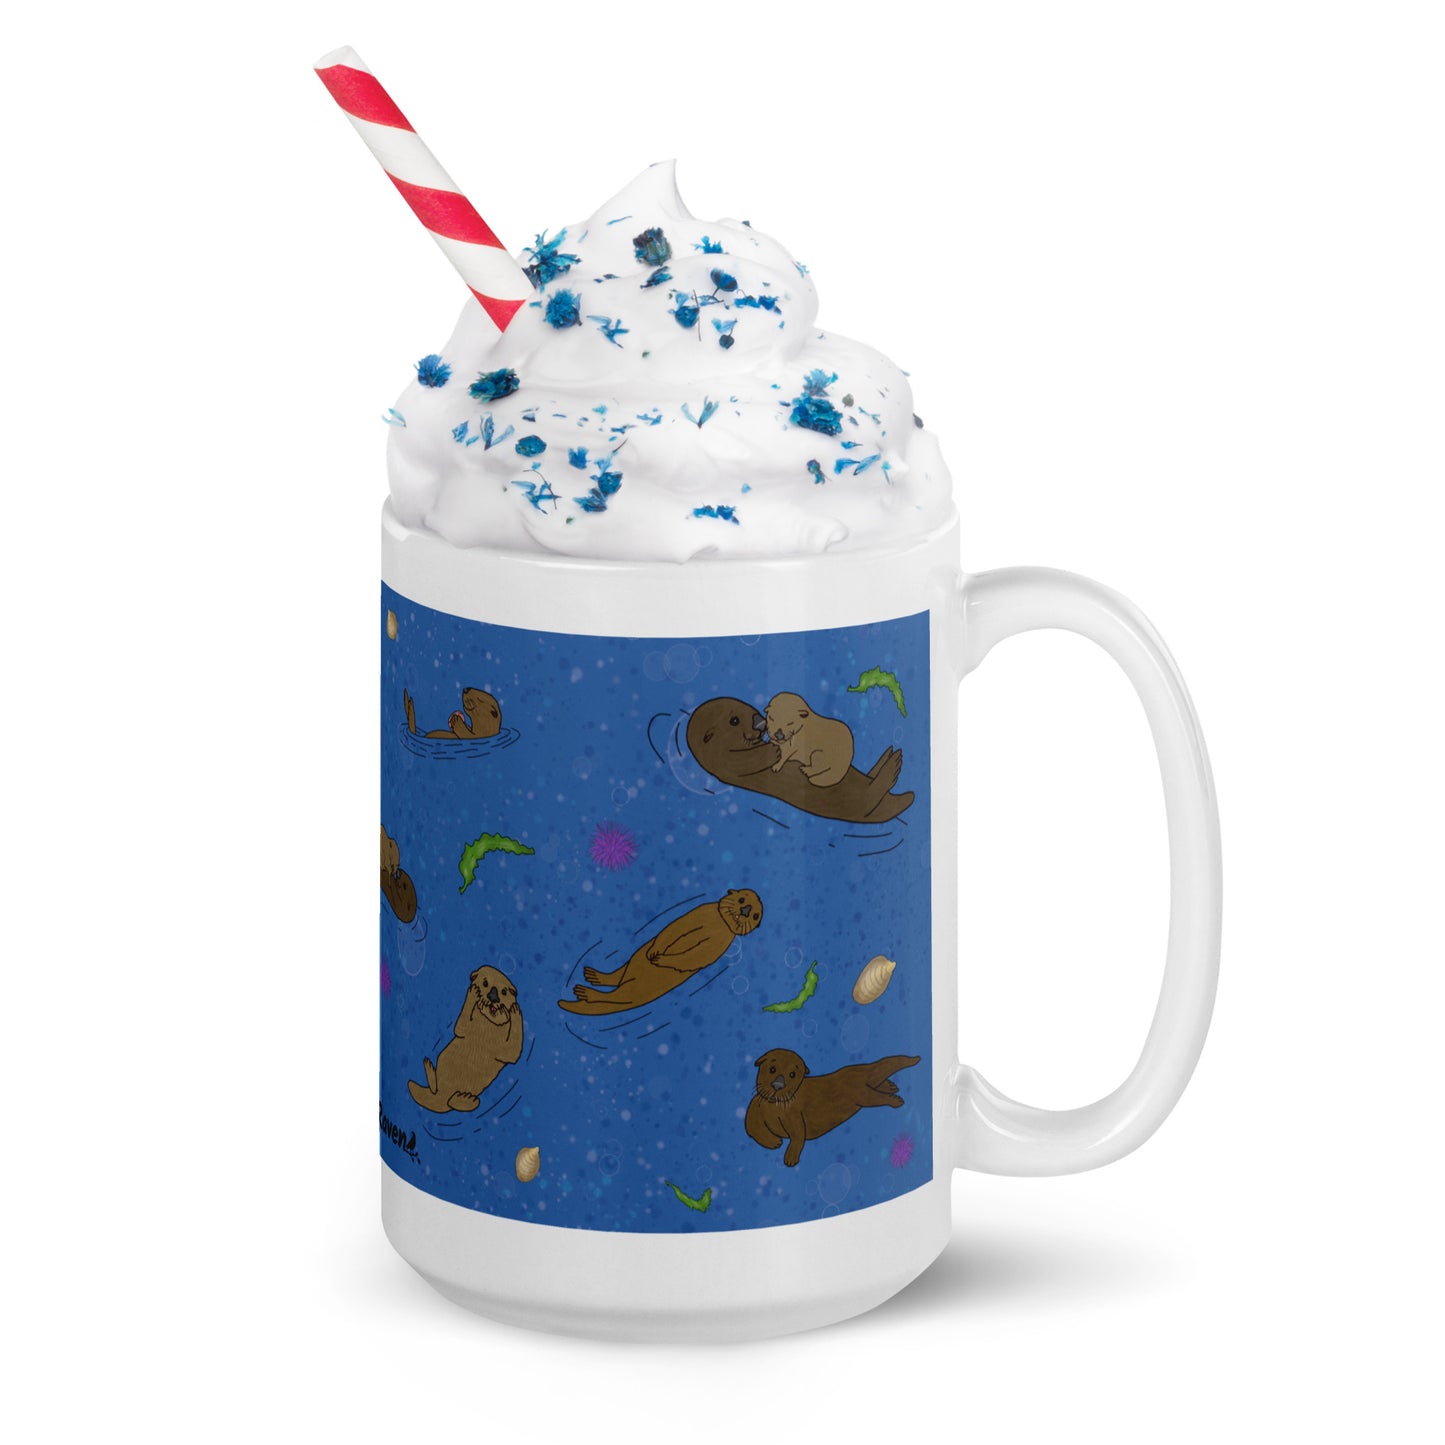 15 ounce white ceramic mug with sea otters on an ocean blue background. Mug is microwave and dishwasher safe. Shown with whipped cream, sprinkles, and a straw.